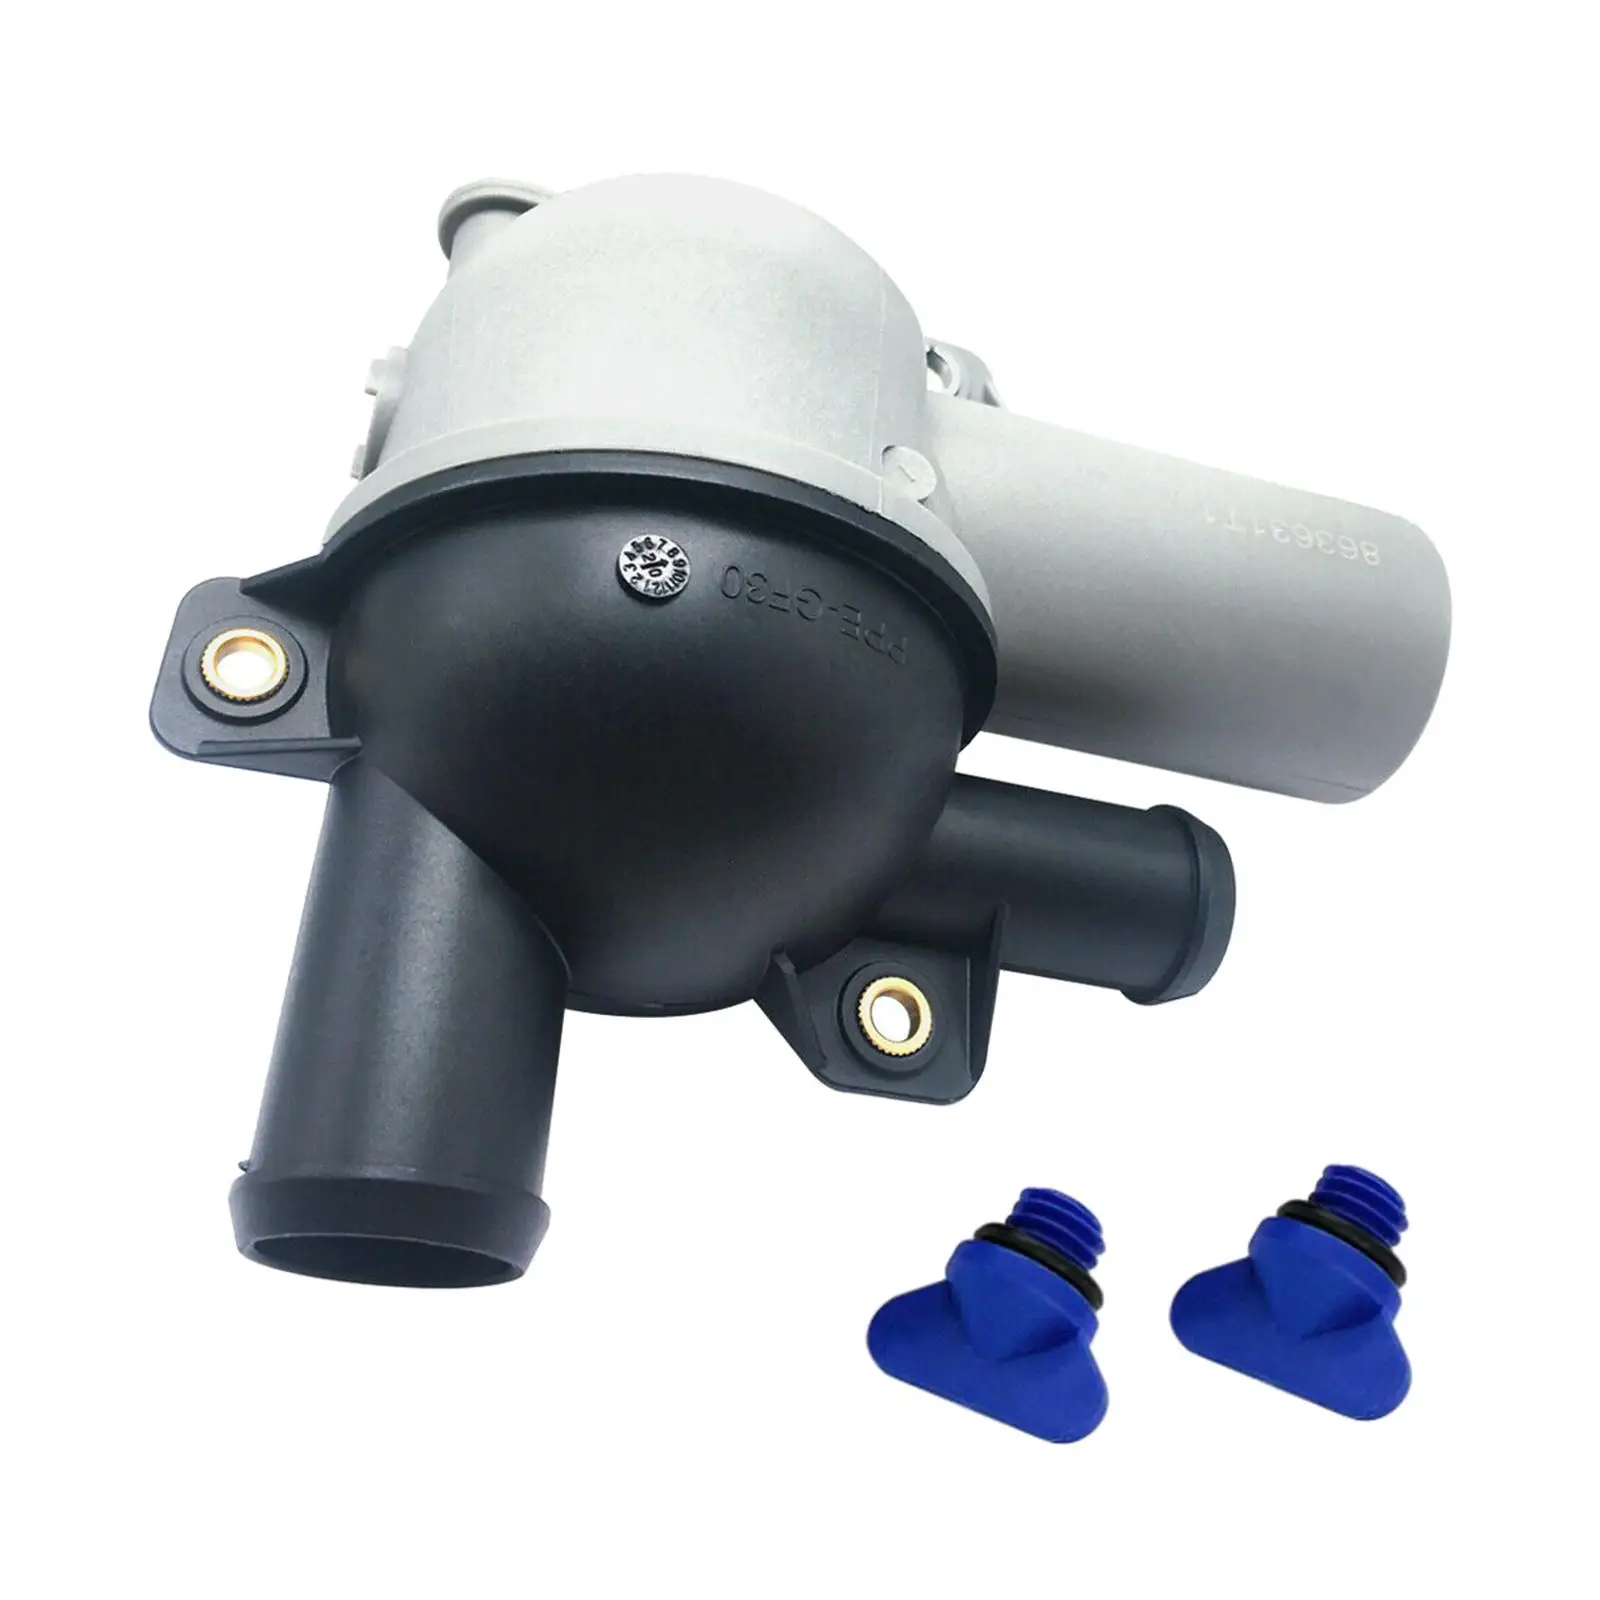 Manual Drain Water Distribution Housing with Drain Plugs Control Valve Fit for Inboard Easy Installation